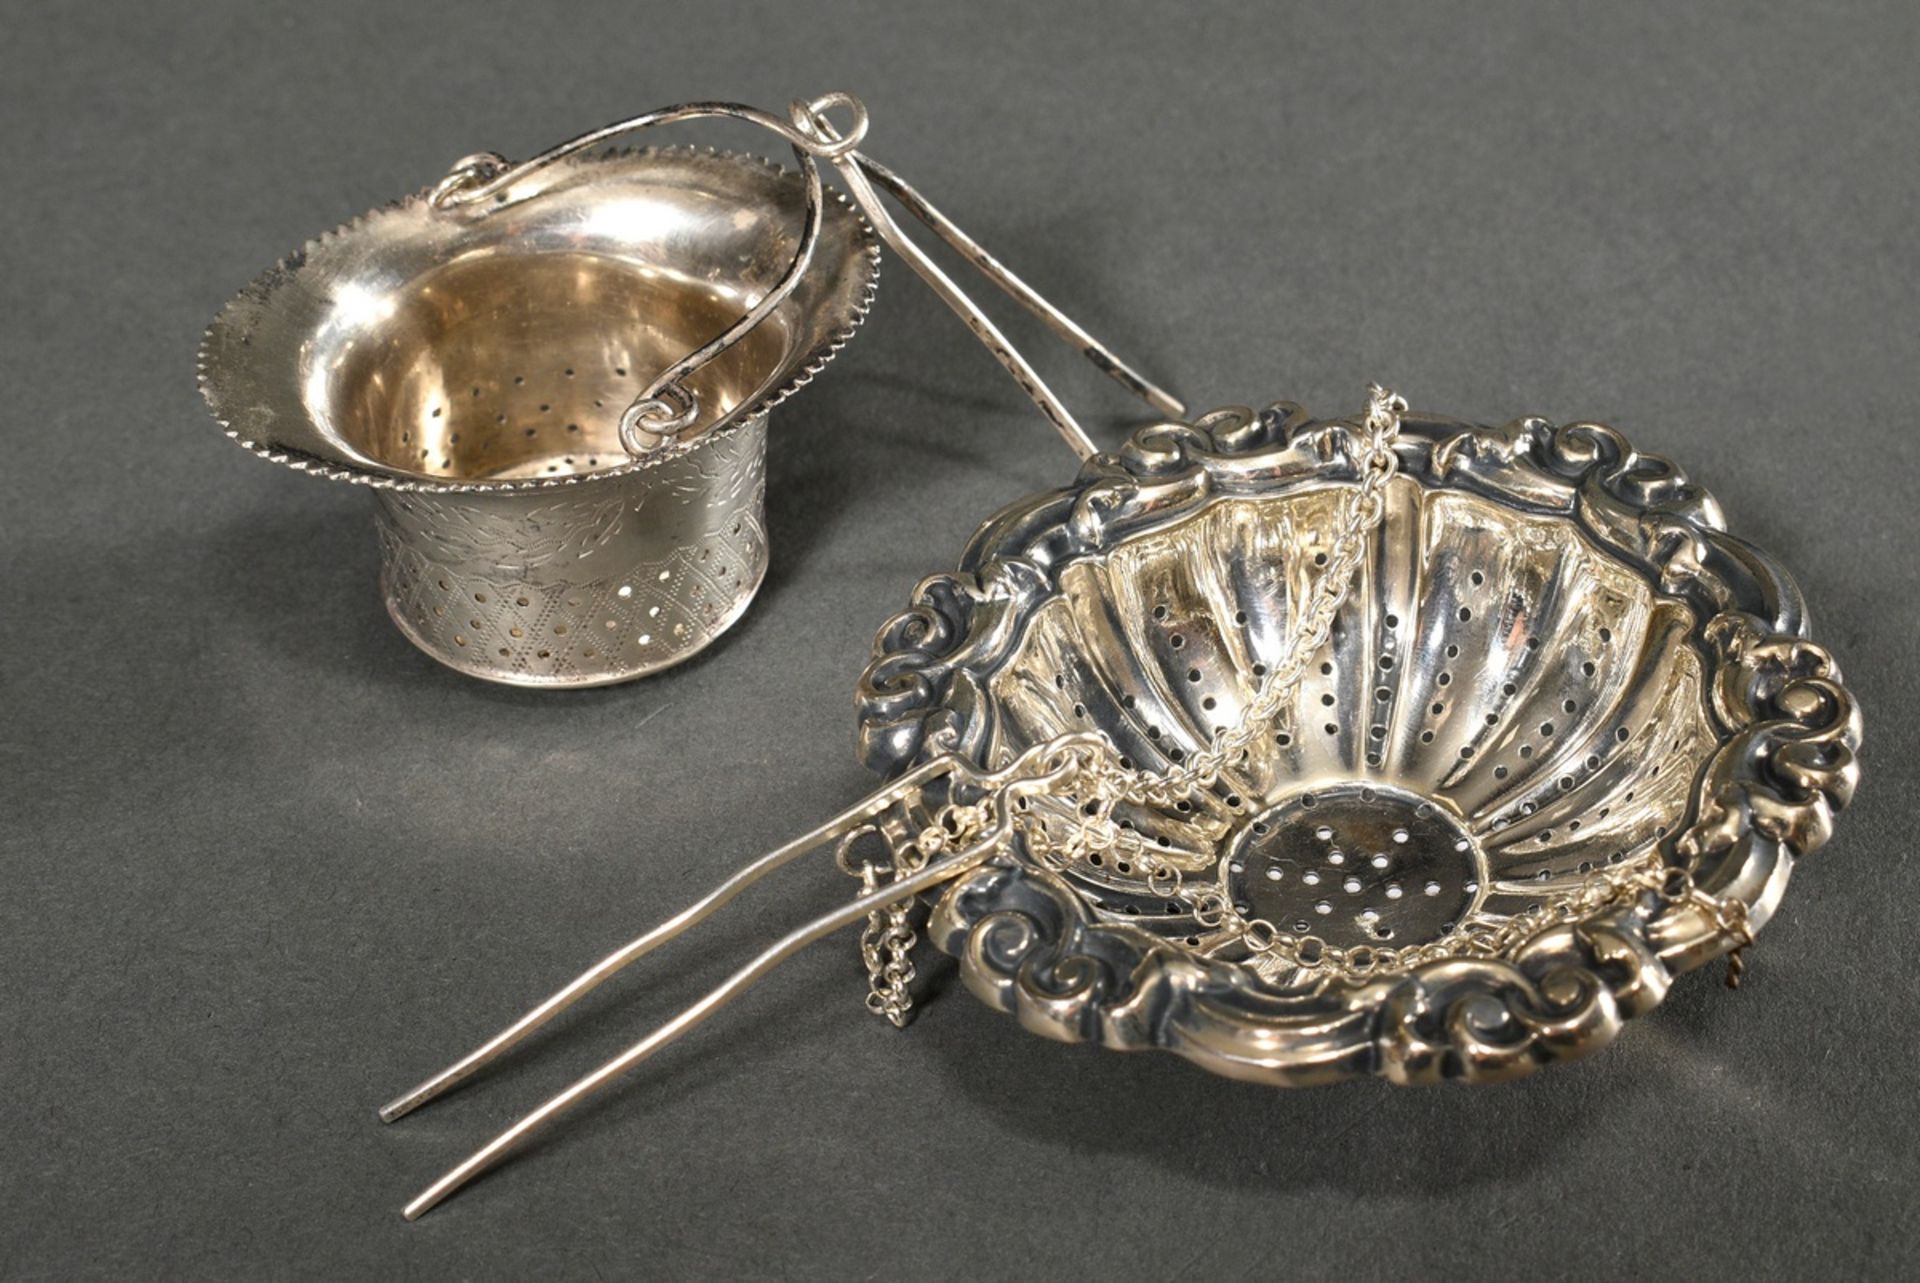 3 Various pieces of silver-plated Biedermeier pastry basket (21x19.5cm) and 2 tea strainers for han - Image 5 of 6